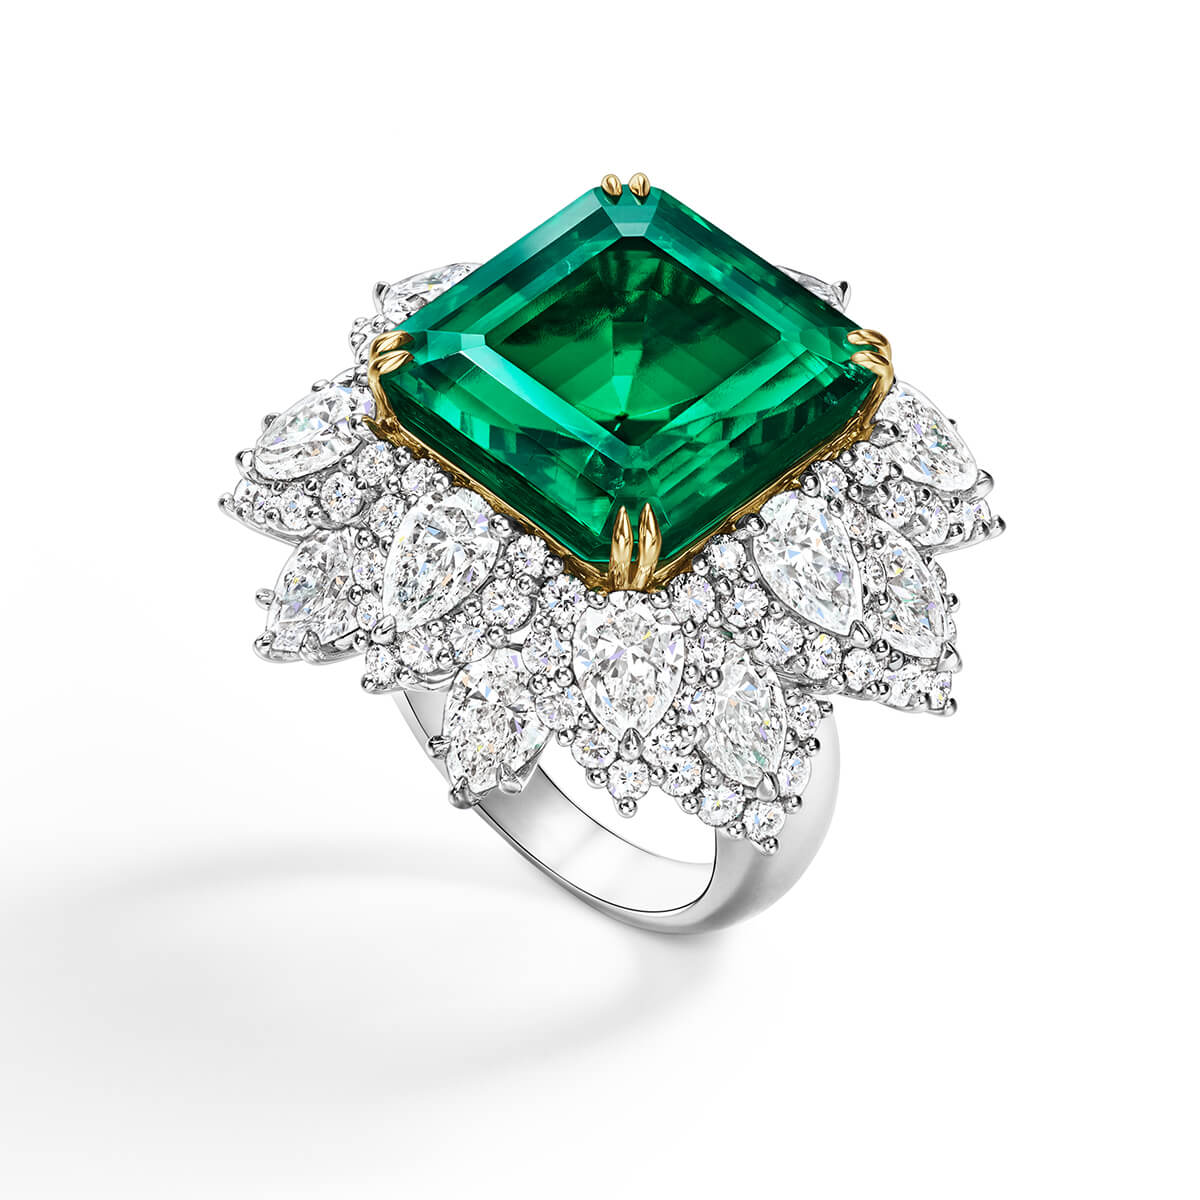 The Rockefeller-Winston ring featuring a square emerald-cut Colombian emerald center stone weighing 18.03 carats with 108 round brilliant and pear-shaped diamonds set in 18 karat yellow gold and platinum